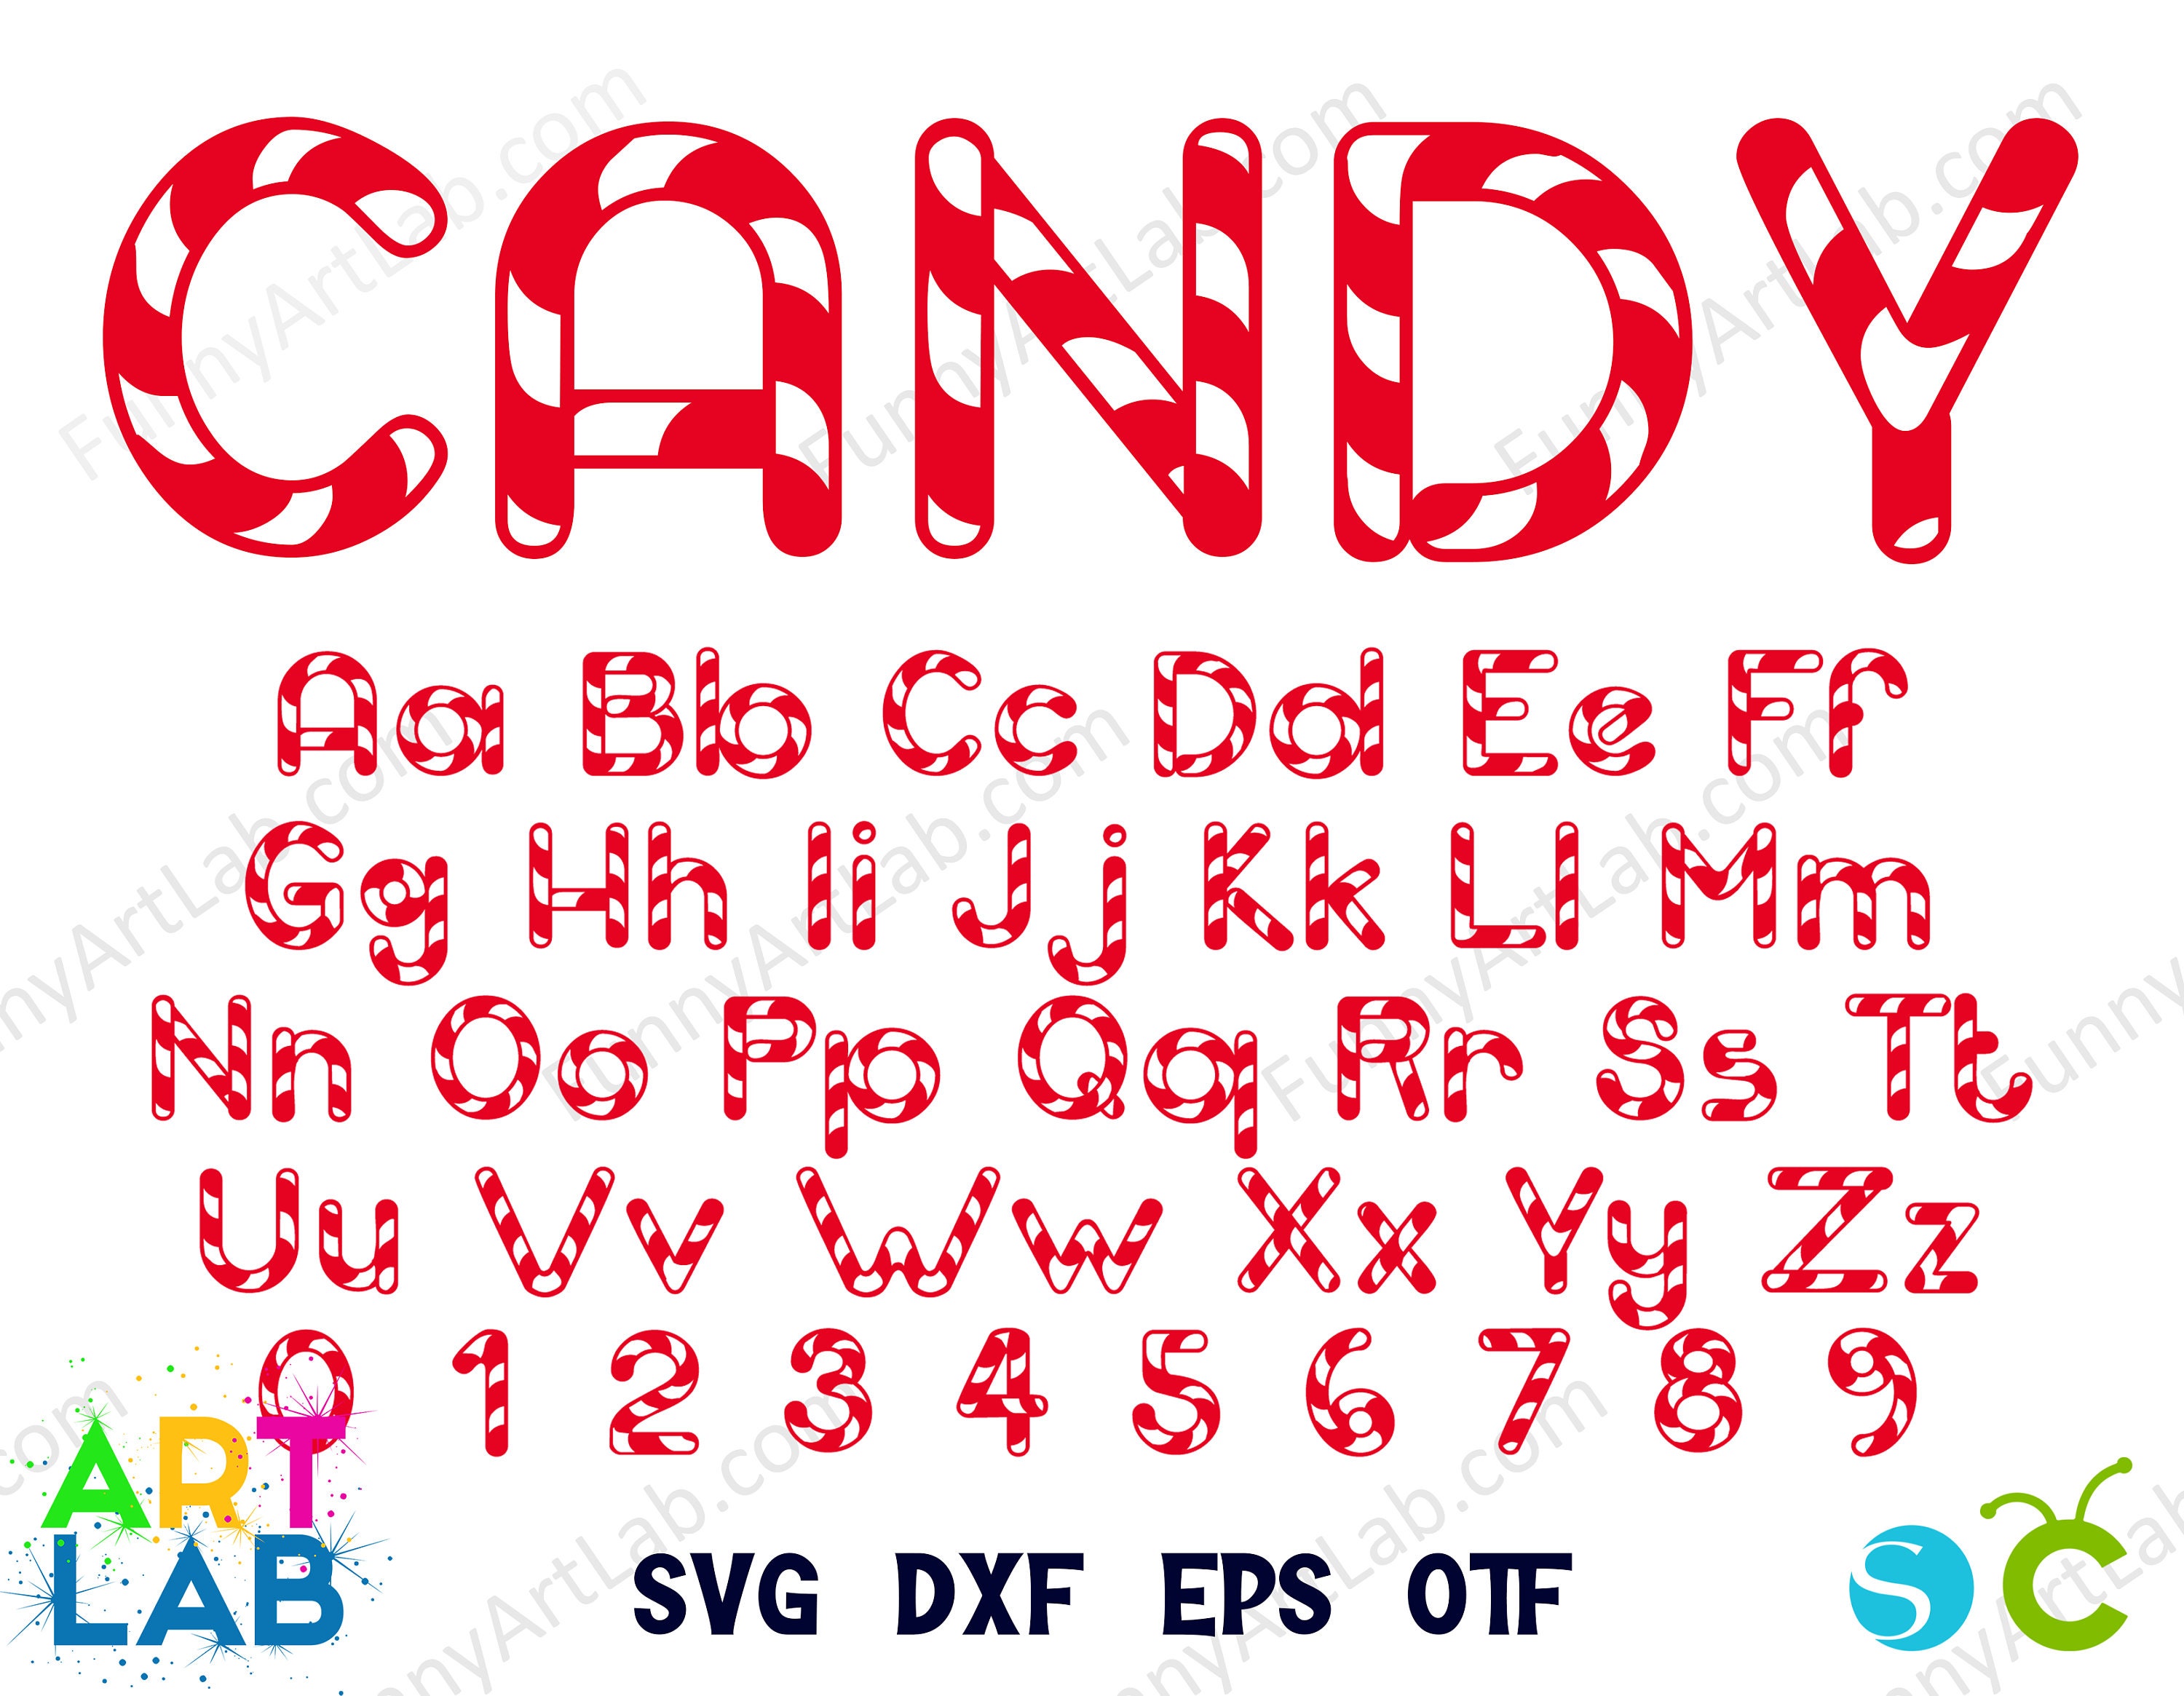 Candy Lab - We got CC Arm Candy CC charms and beads